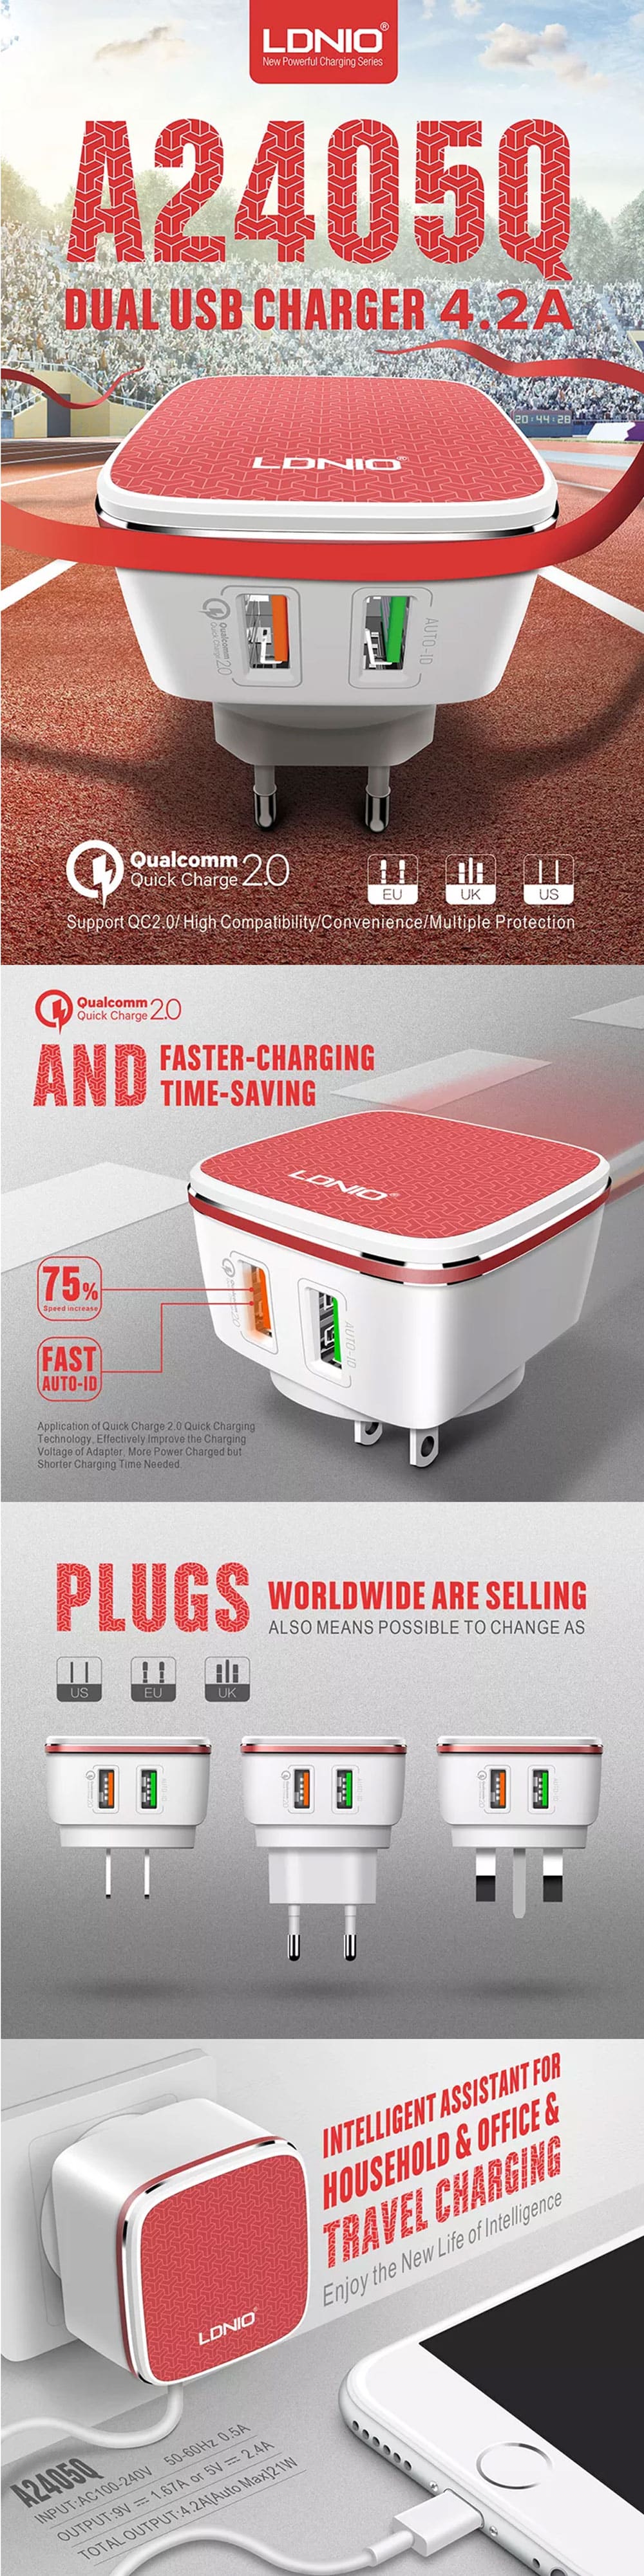 LDNIO A2405Q Qualcomm 3 Dual Port Wall Charger 3